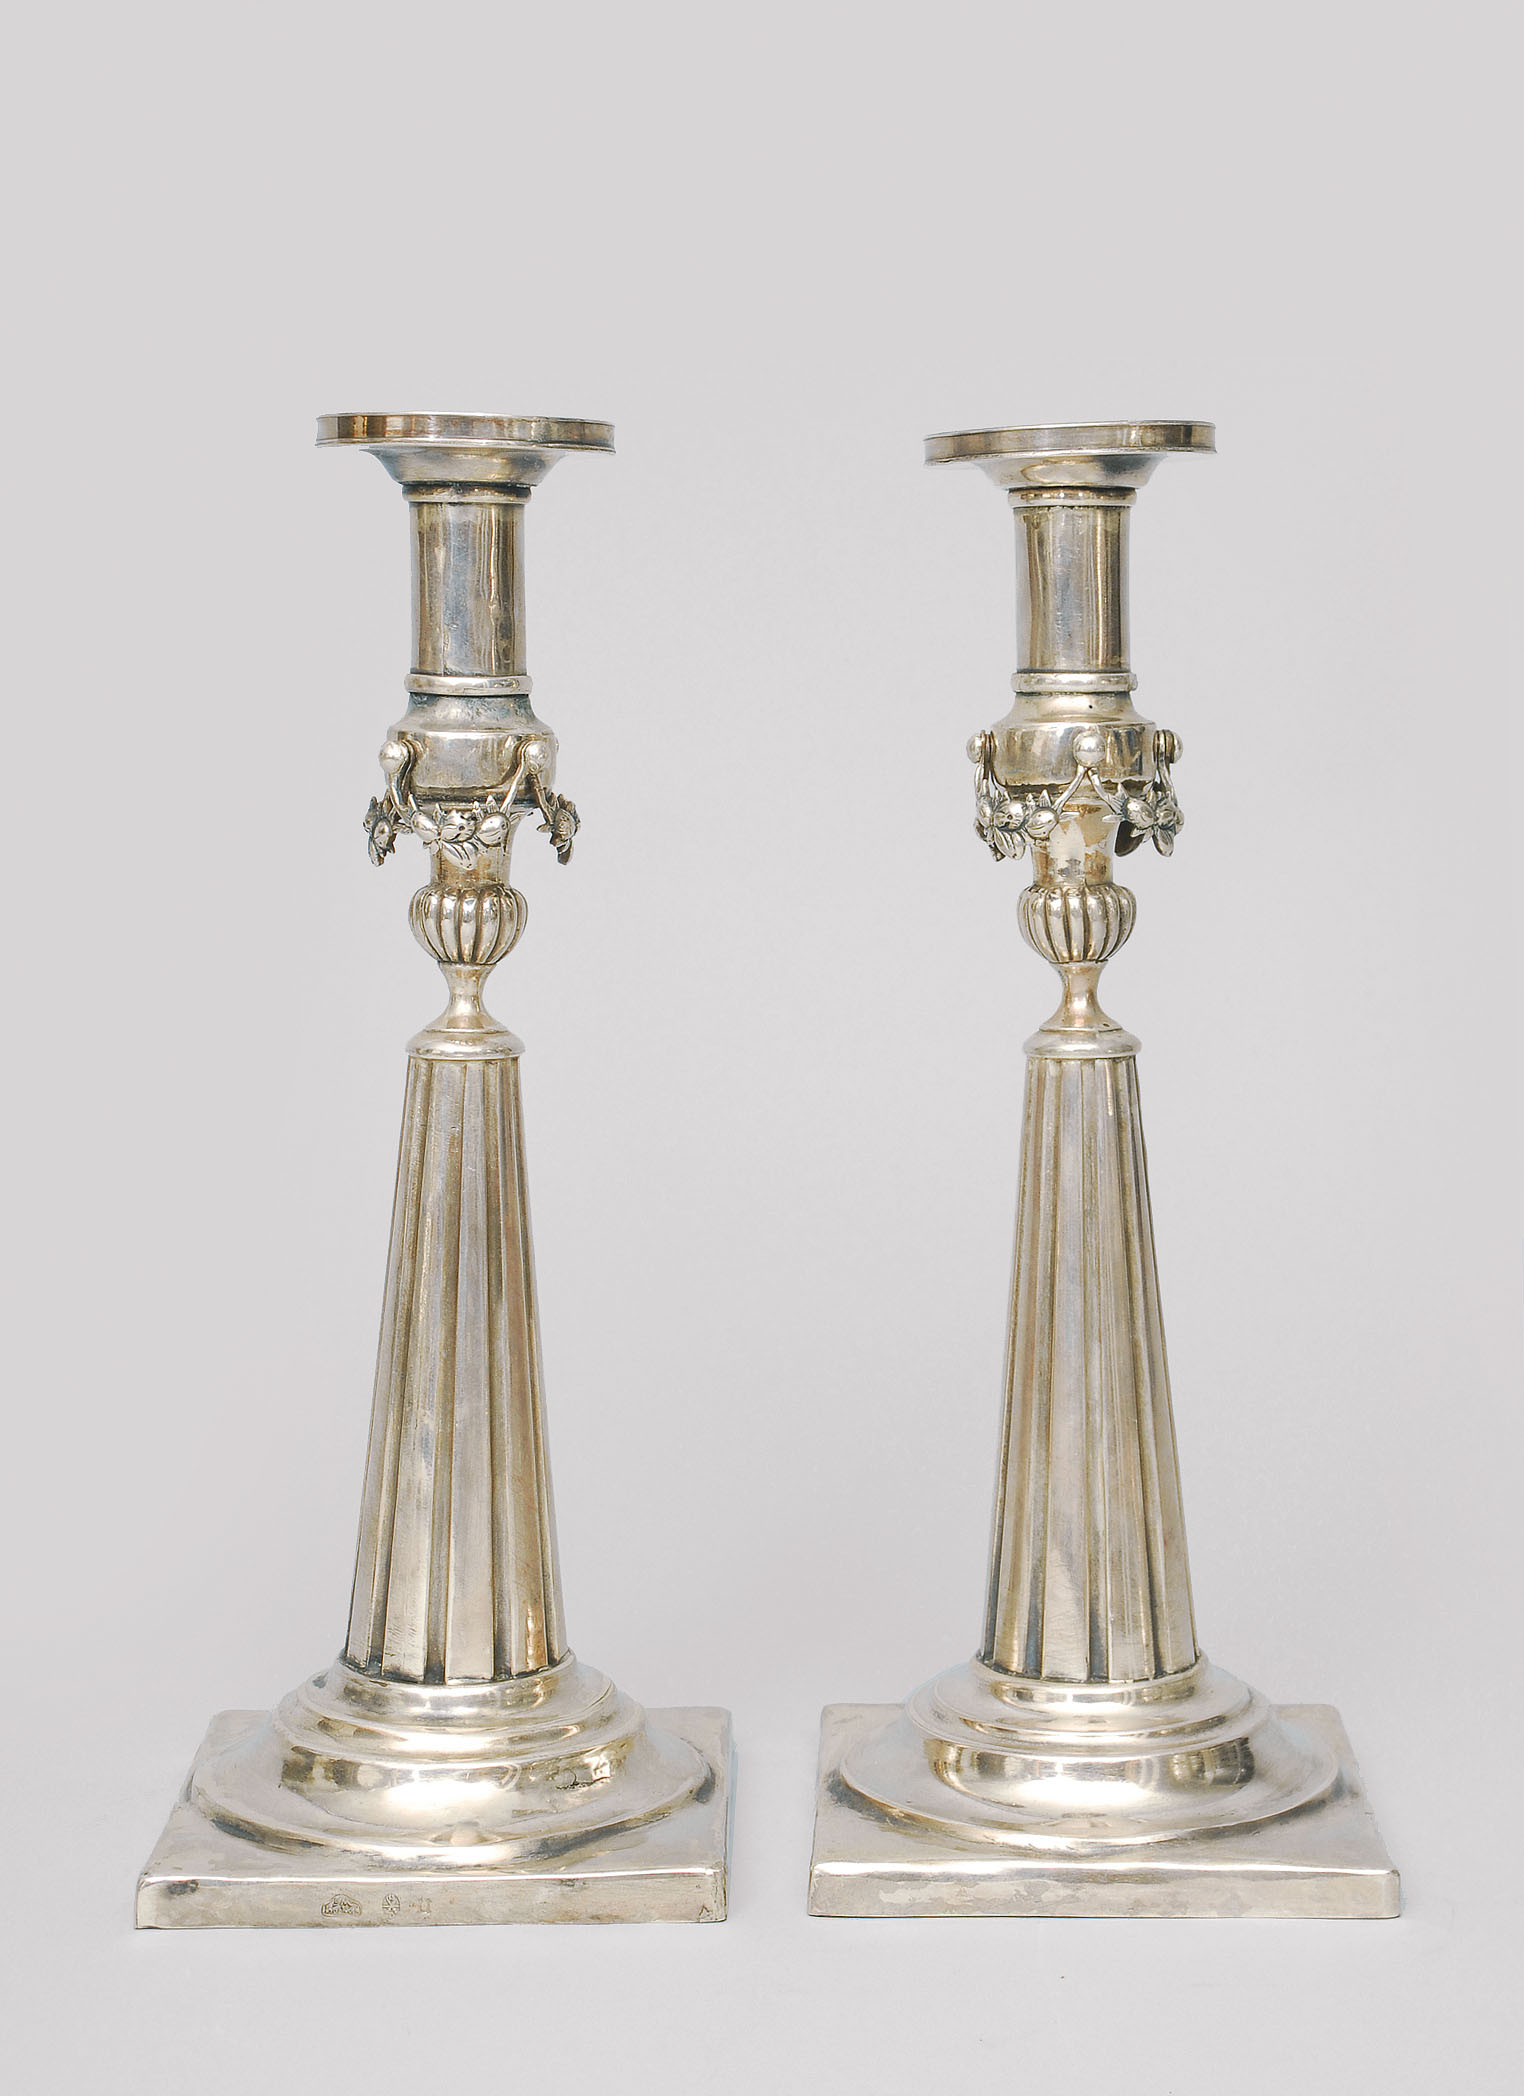 A pair of Empire table candle holders